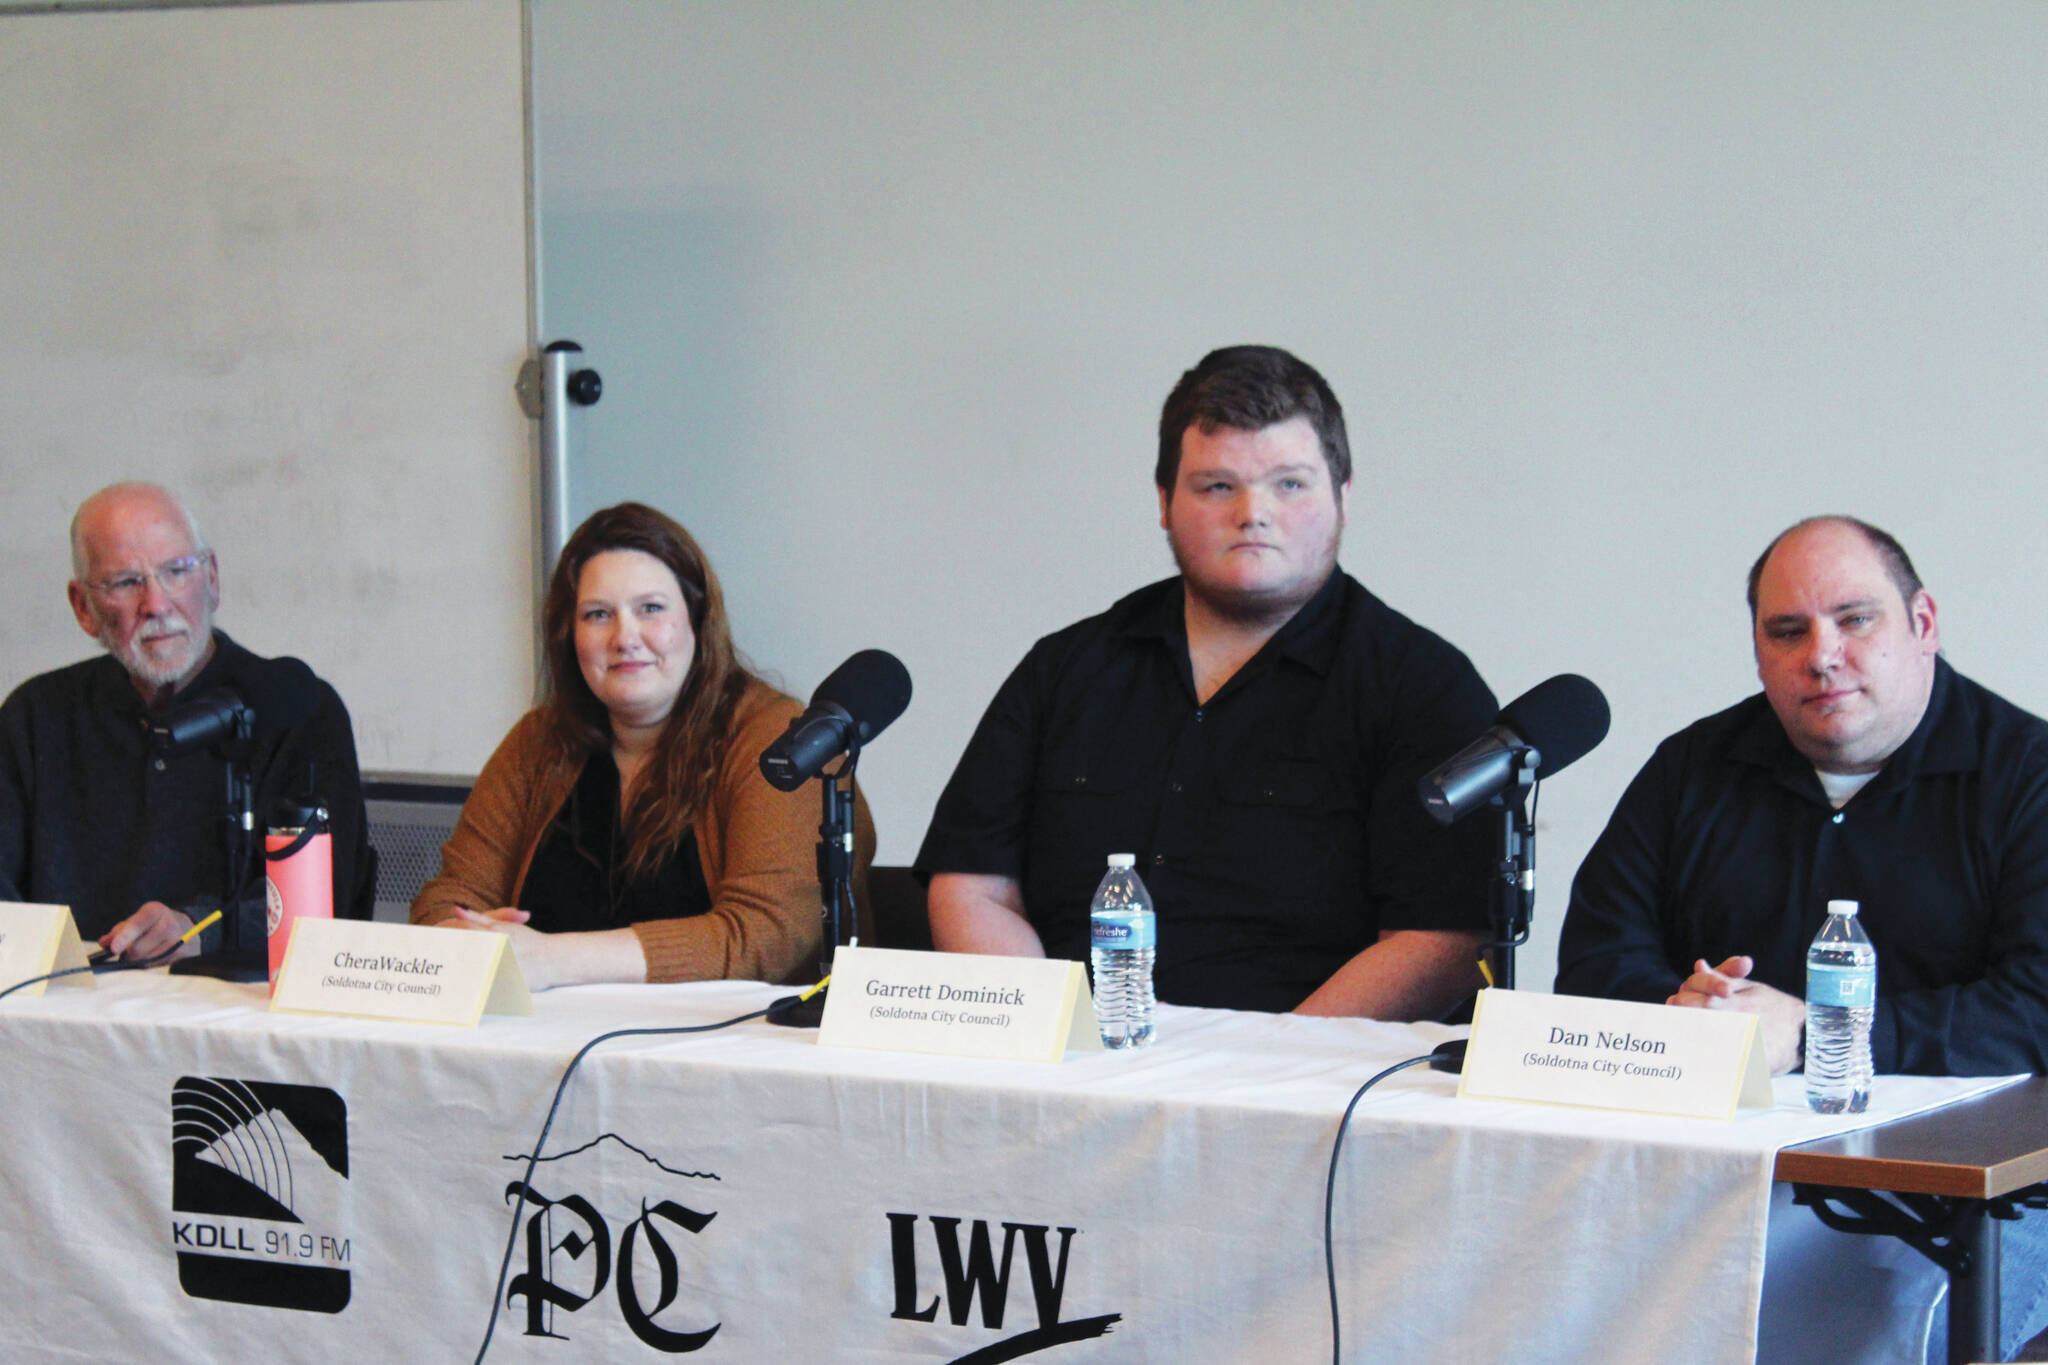 Jake Dye/Peninsula Clarion
From left: Paul Whitney, Chera Wackler, Garrett Dominick and Dan Nelson participate in a Soldotna City Council candidate forum at the Soldotna Public Library on Monday.